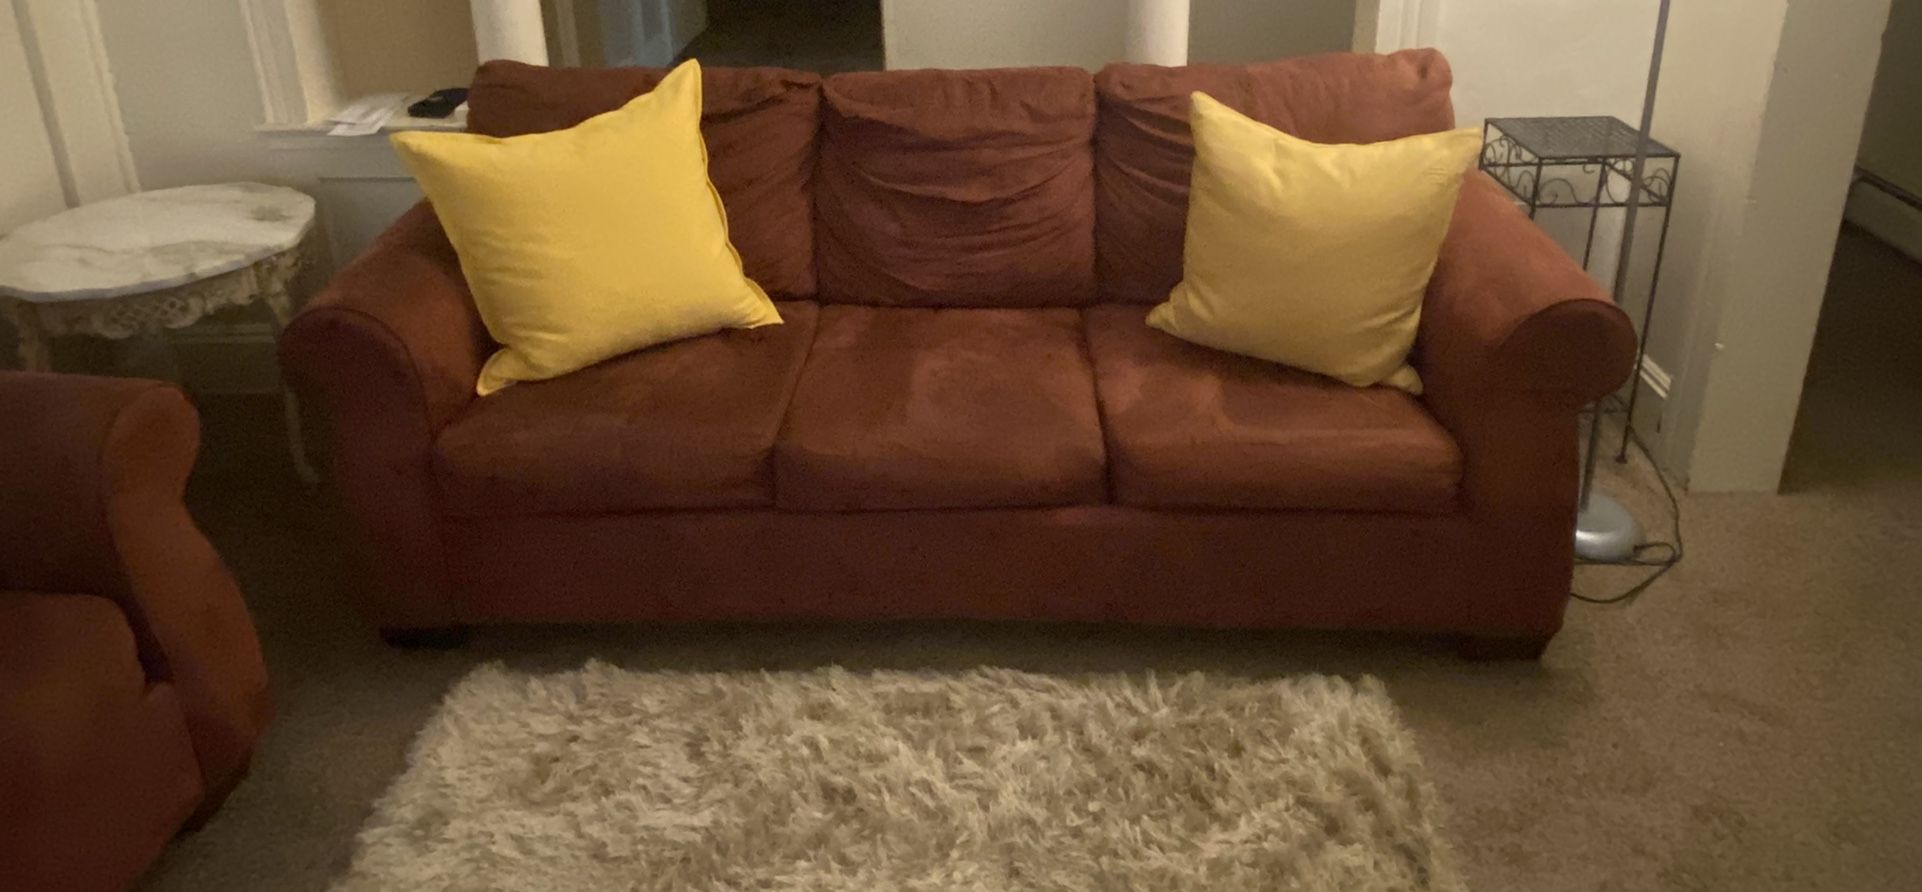 Couches  In Good Condition big couch pull out Into queen size bed